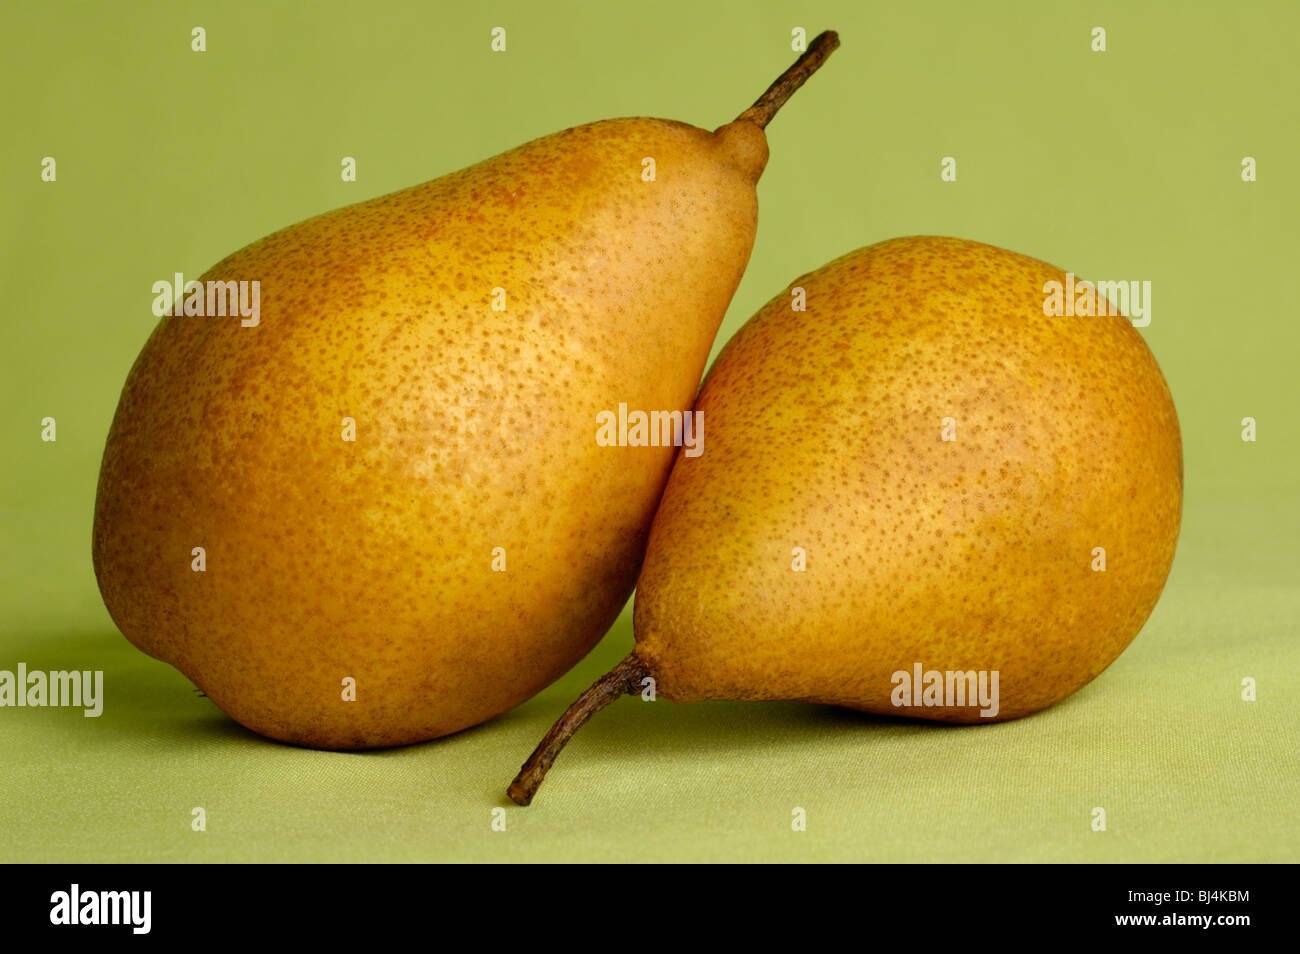 Two pears isolated silhouettes on light green background artistic still-life Stock Photo